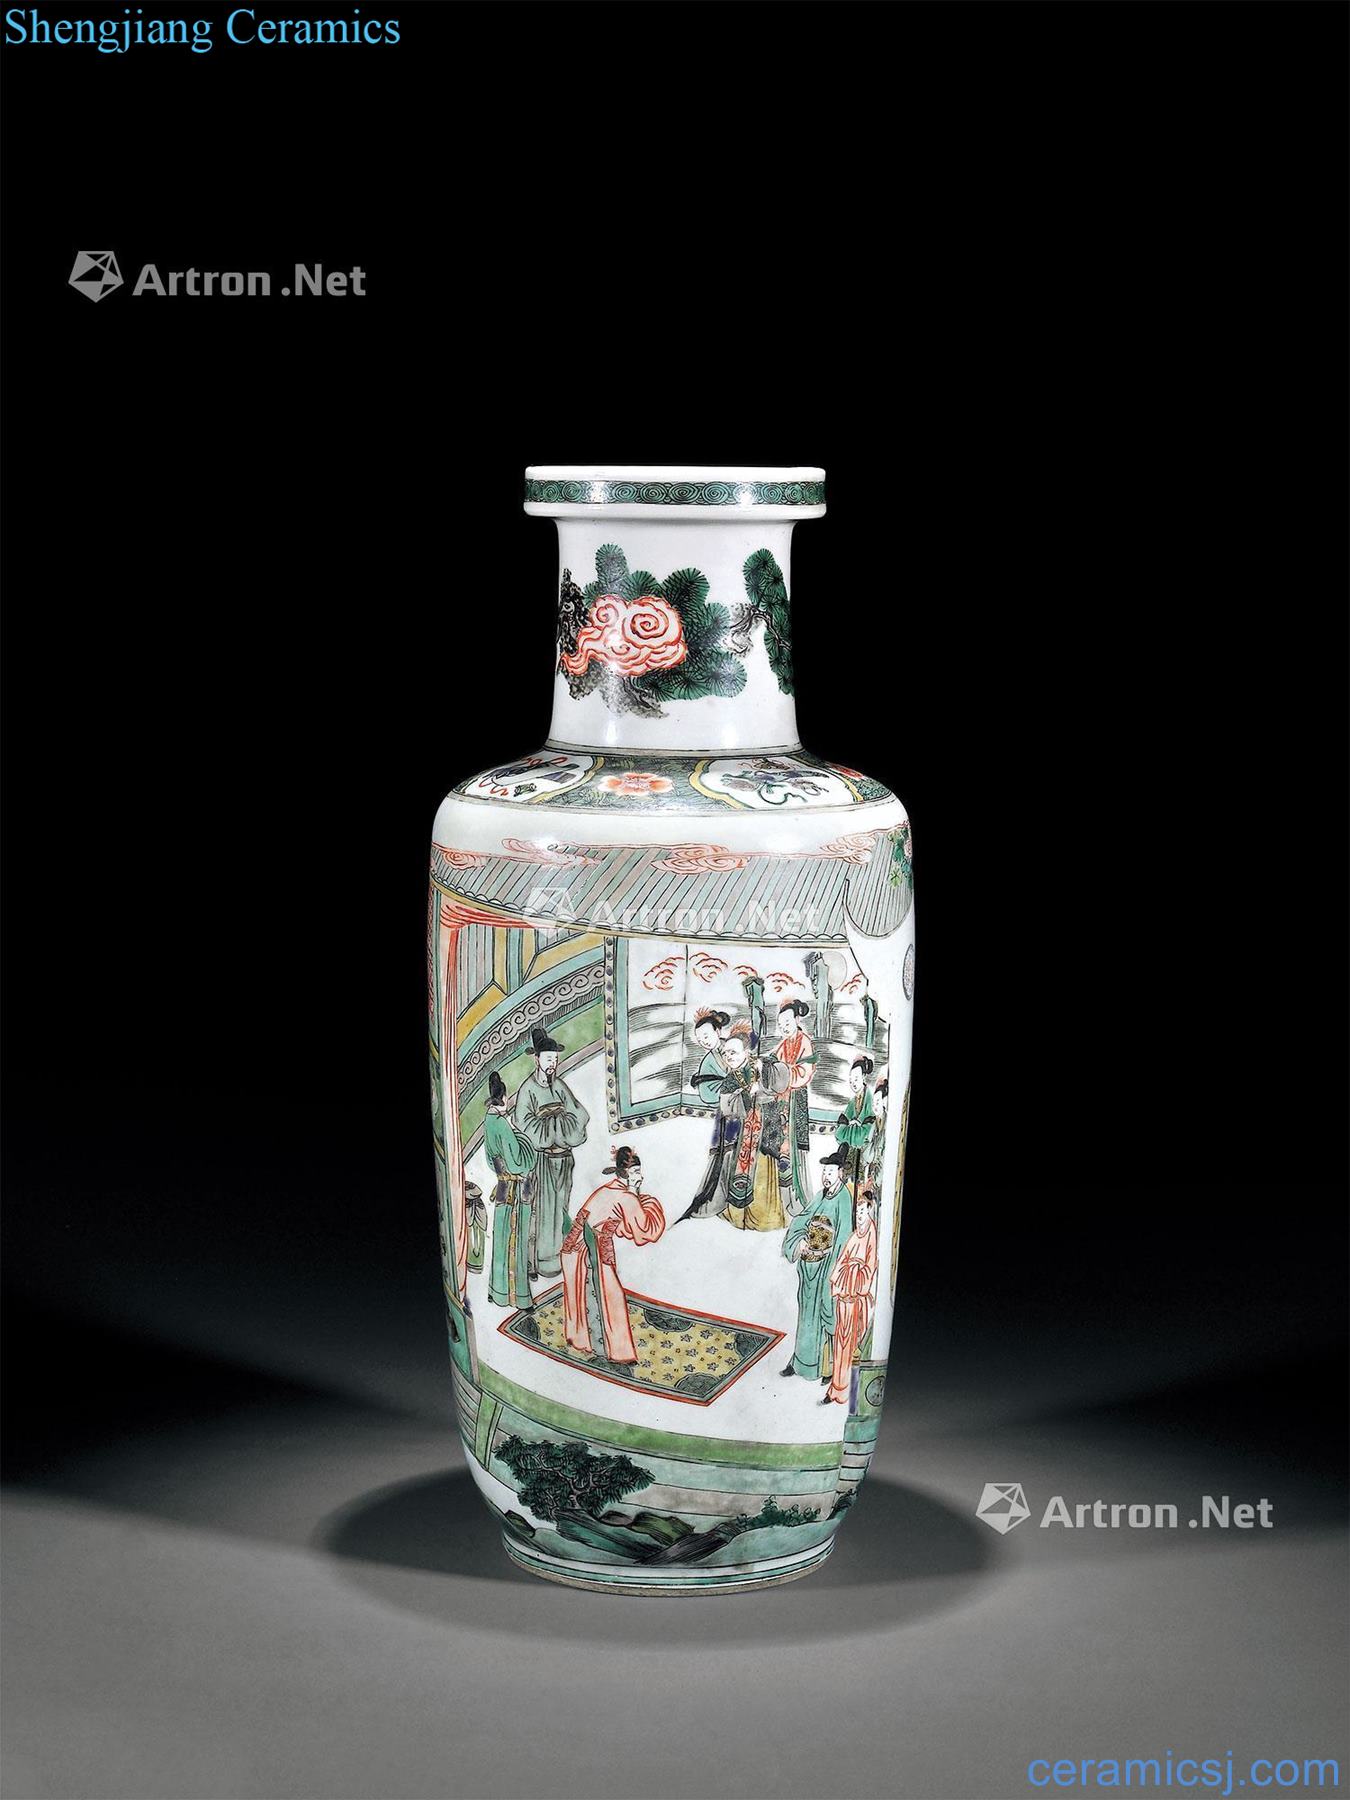 The qing emperor kangxi lines were bottles colorful characters